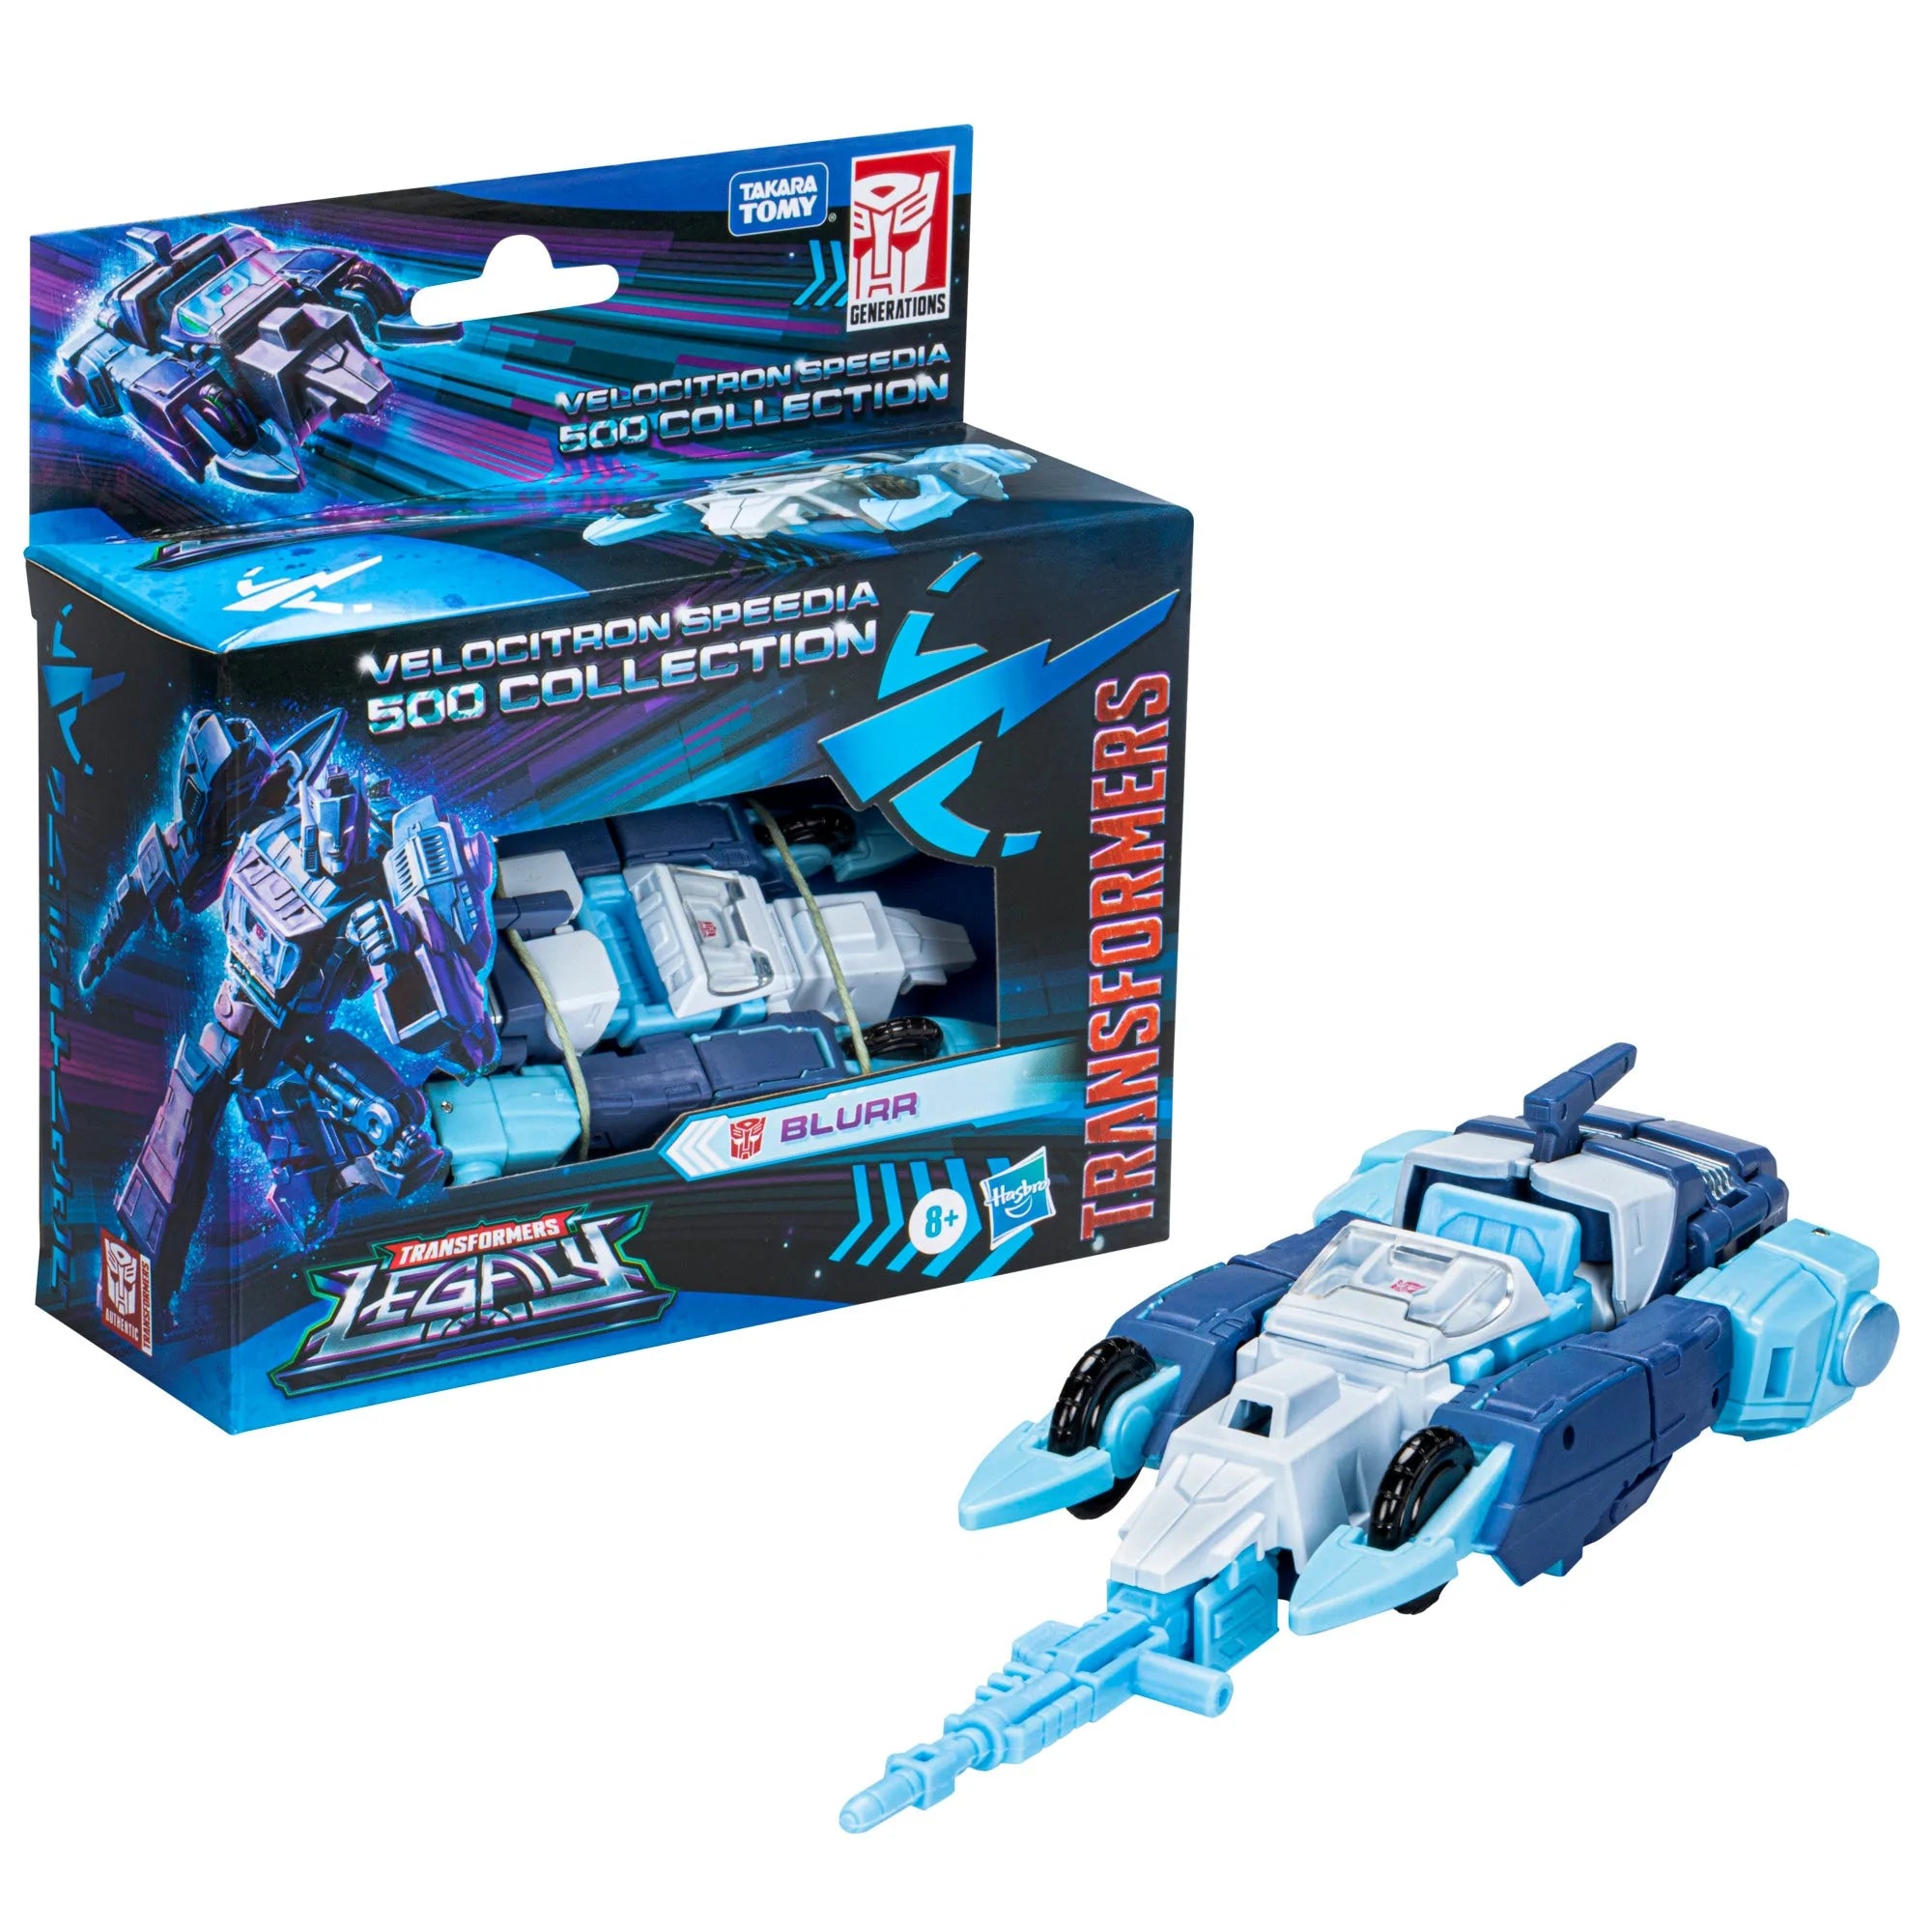 Transformers Legacy Velocitron Speedia 500 Collection Deluxe Class IDW Blurr Action Figure